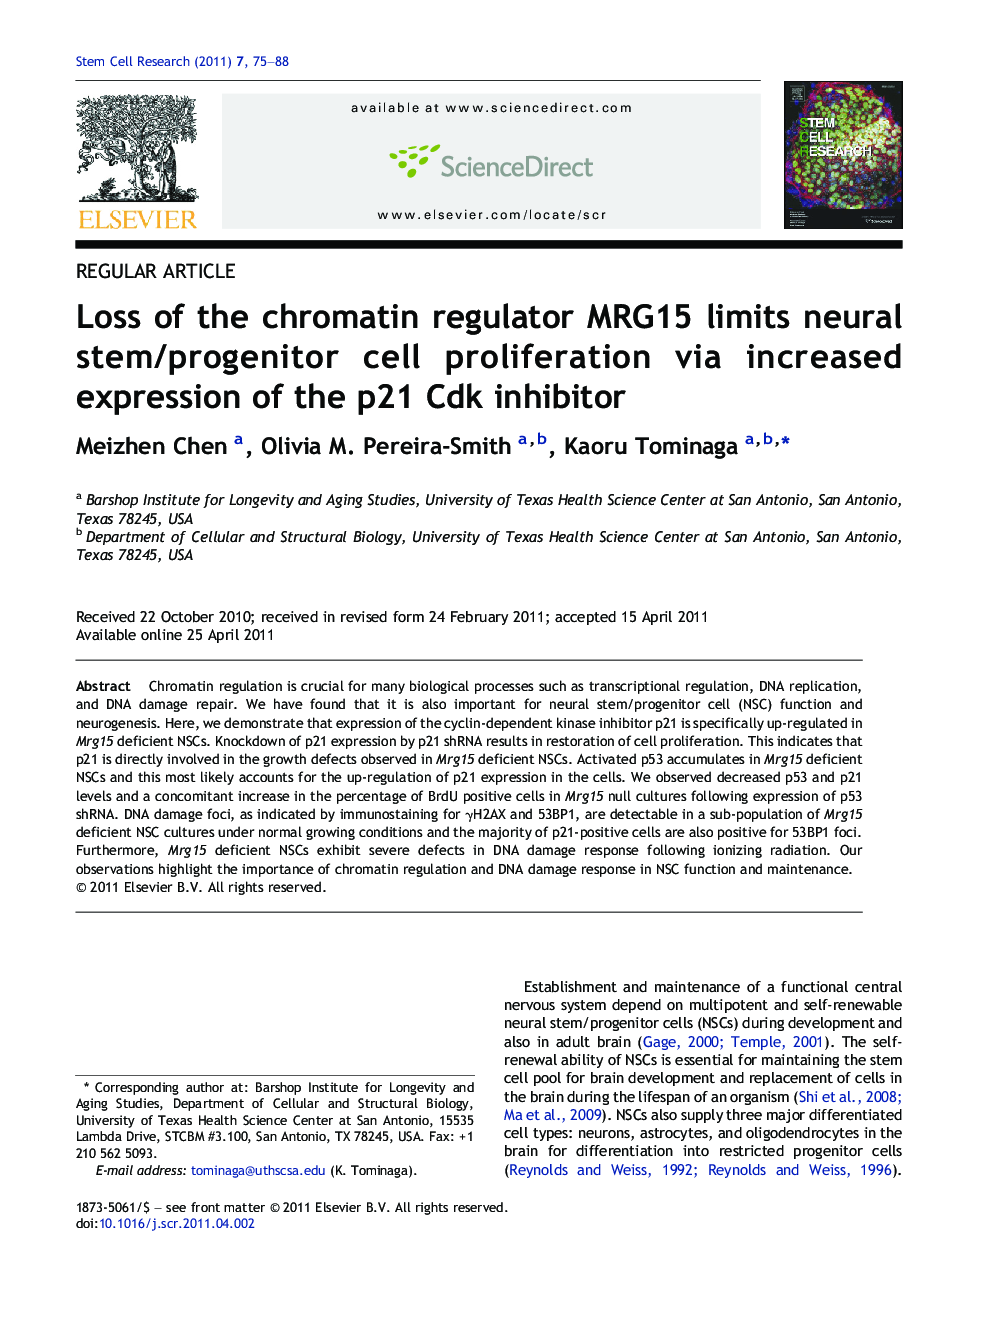 Loss of the chromatin regulator MRG15 limits neural stem/progenitor cell proliferation via increased expression of the p21 Cdk inhibitor